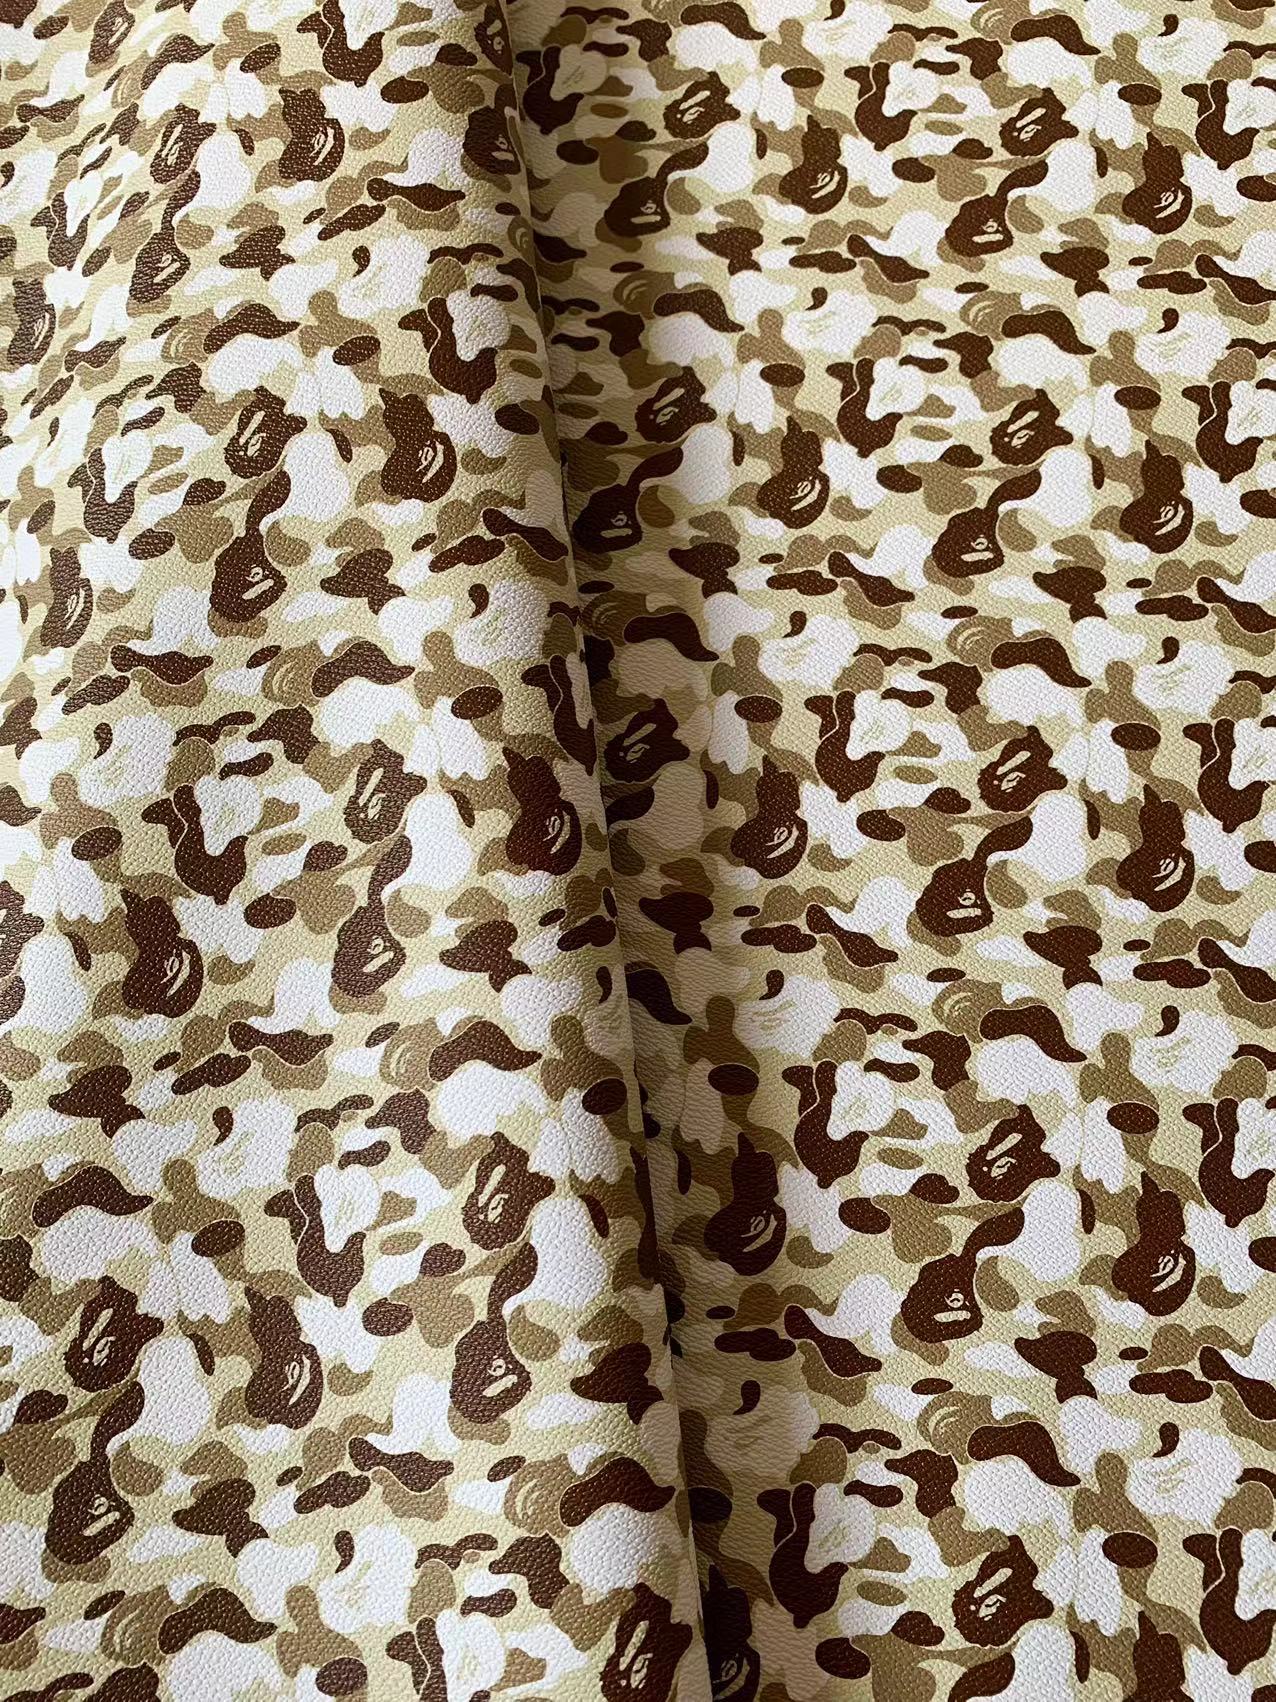 Tianchao New Camouflage Color Bape Leather Fabric For Handmade Handicraft Goods By Yard